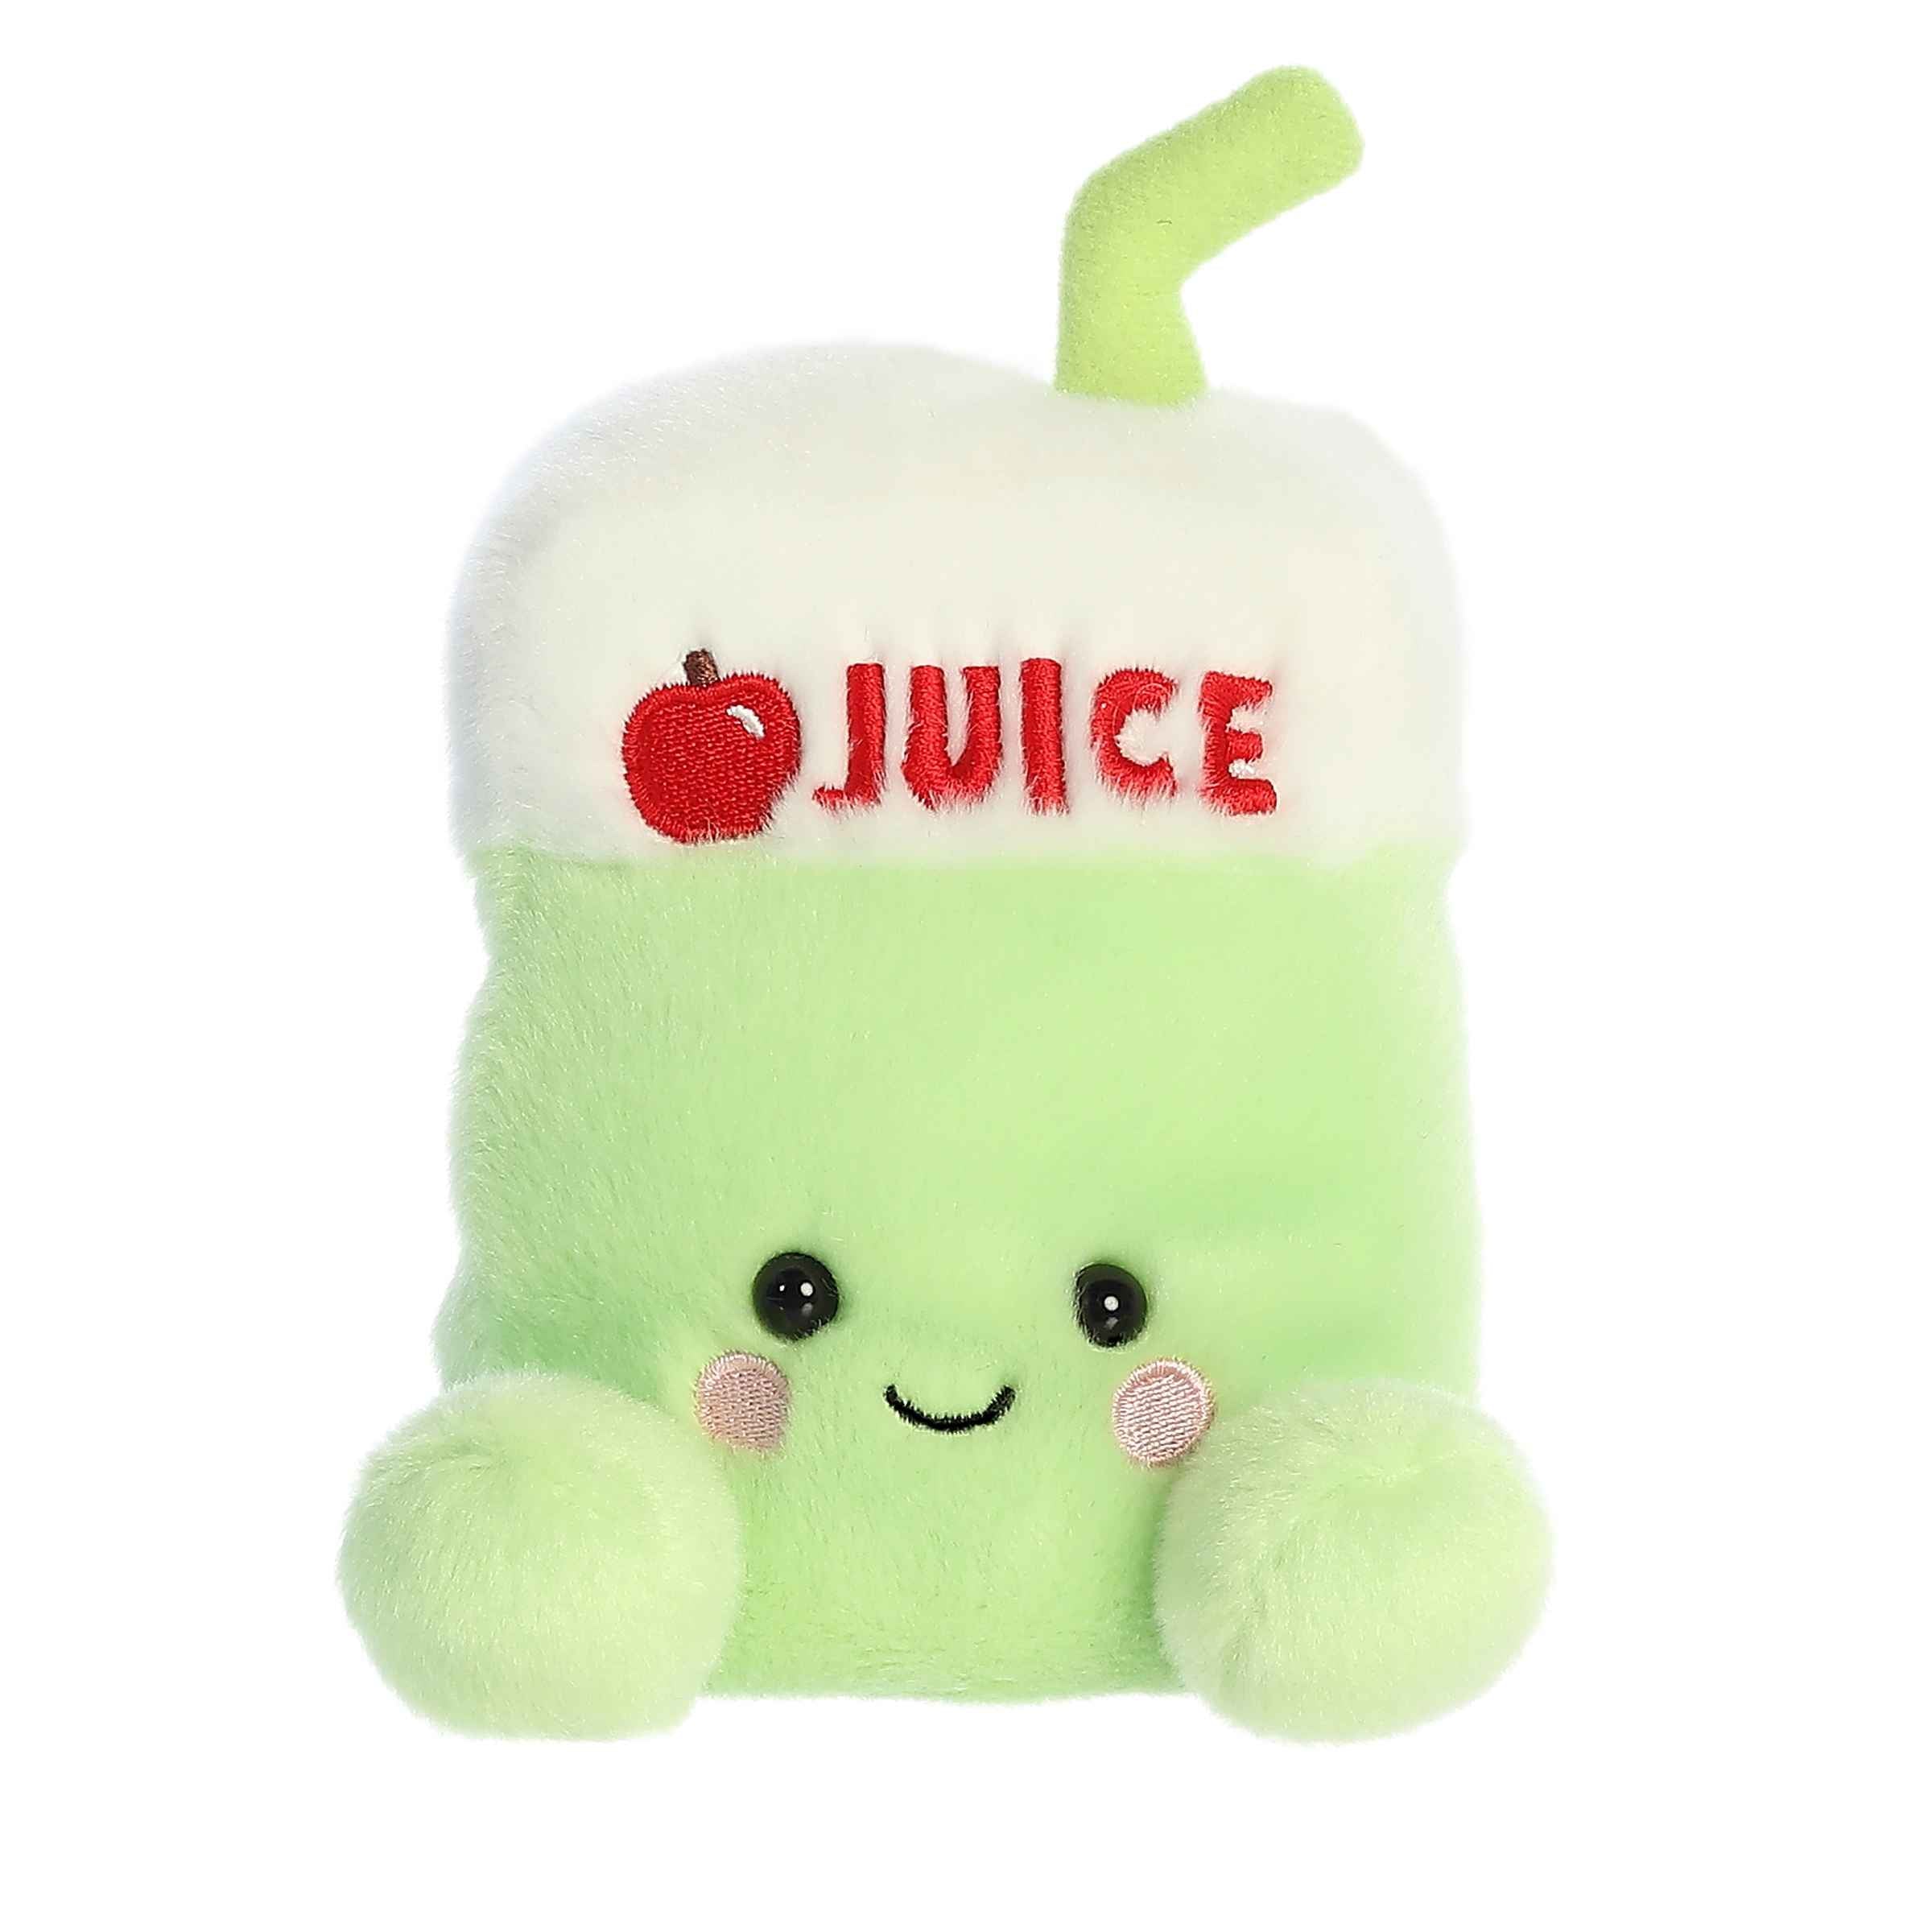 Sippy Apple Juice plush from Palm Pals, apple-green with red apple top